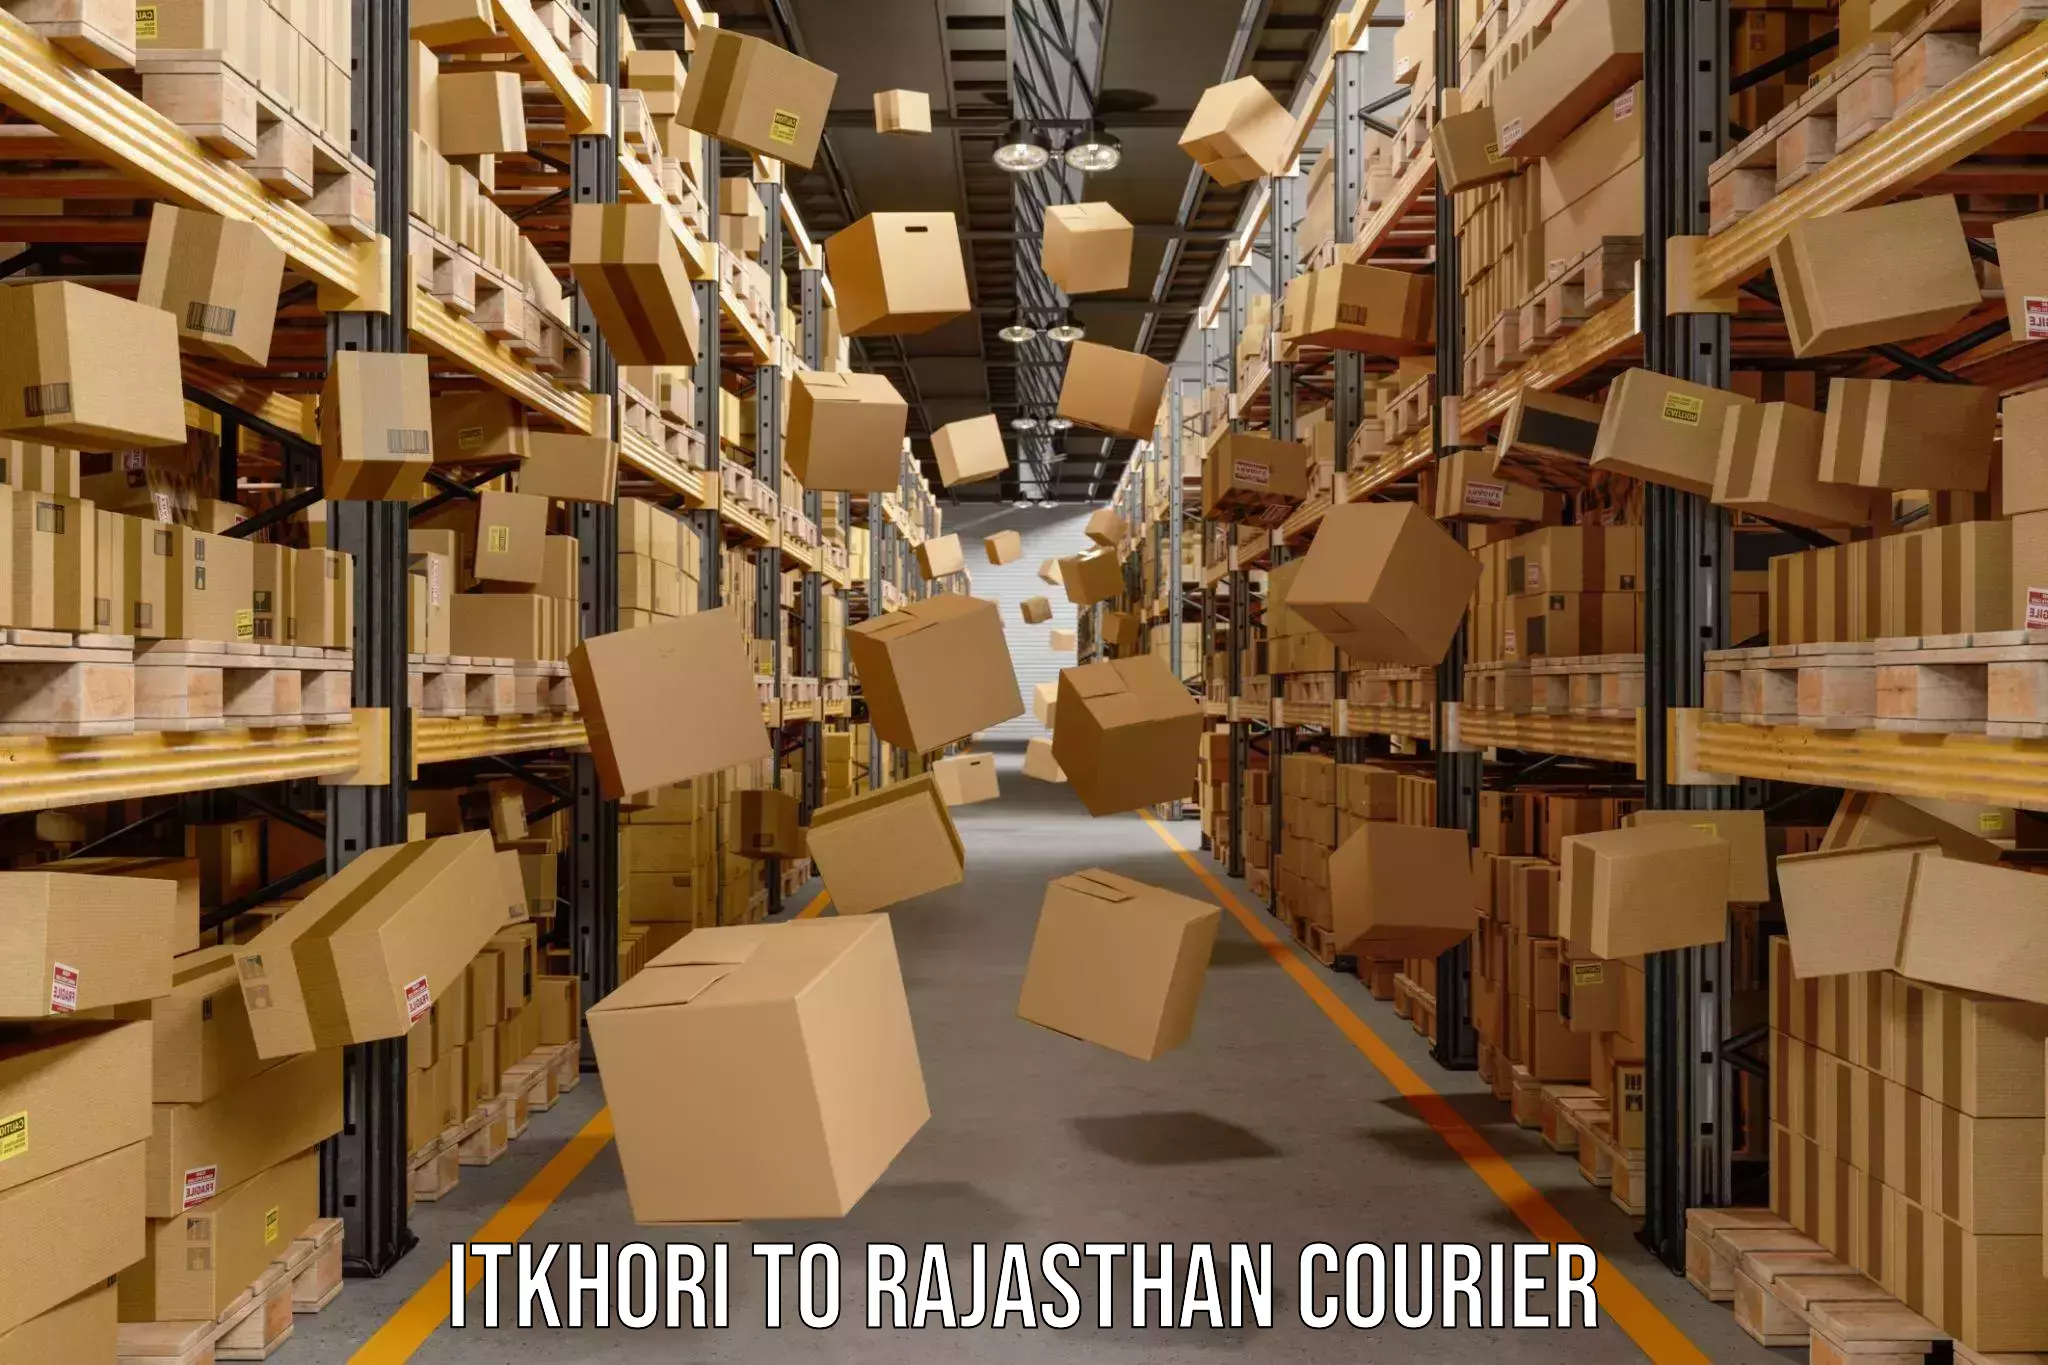 Courier service partnerships Itkhori to Weir